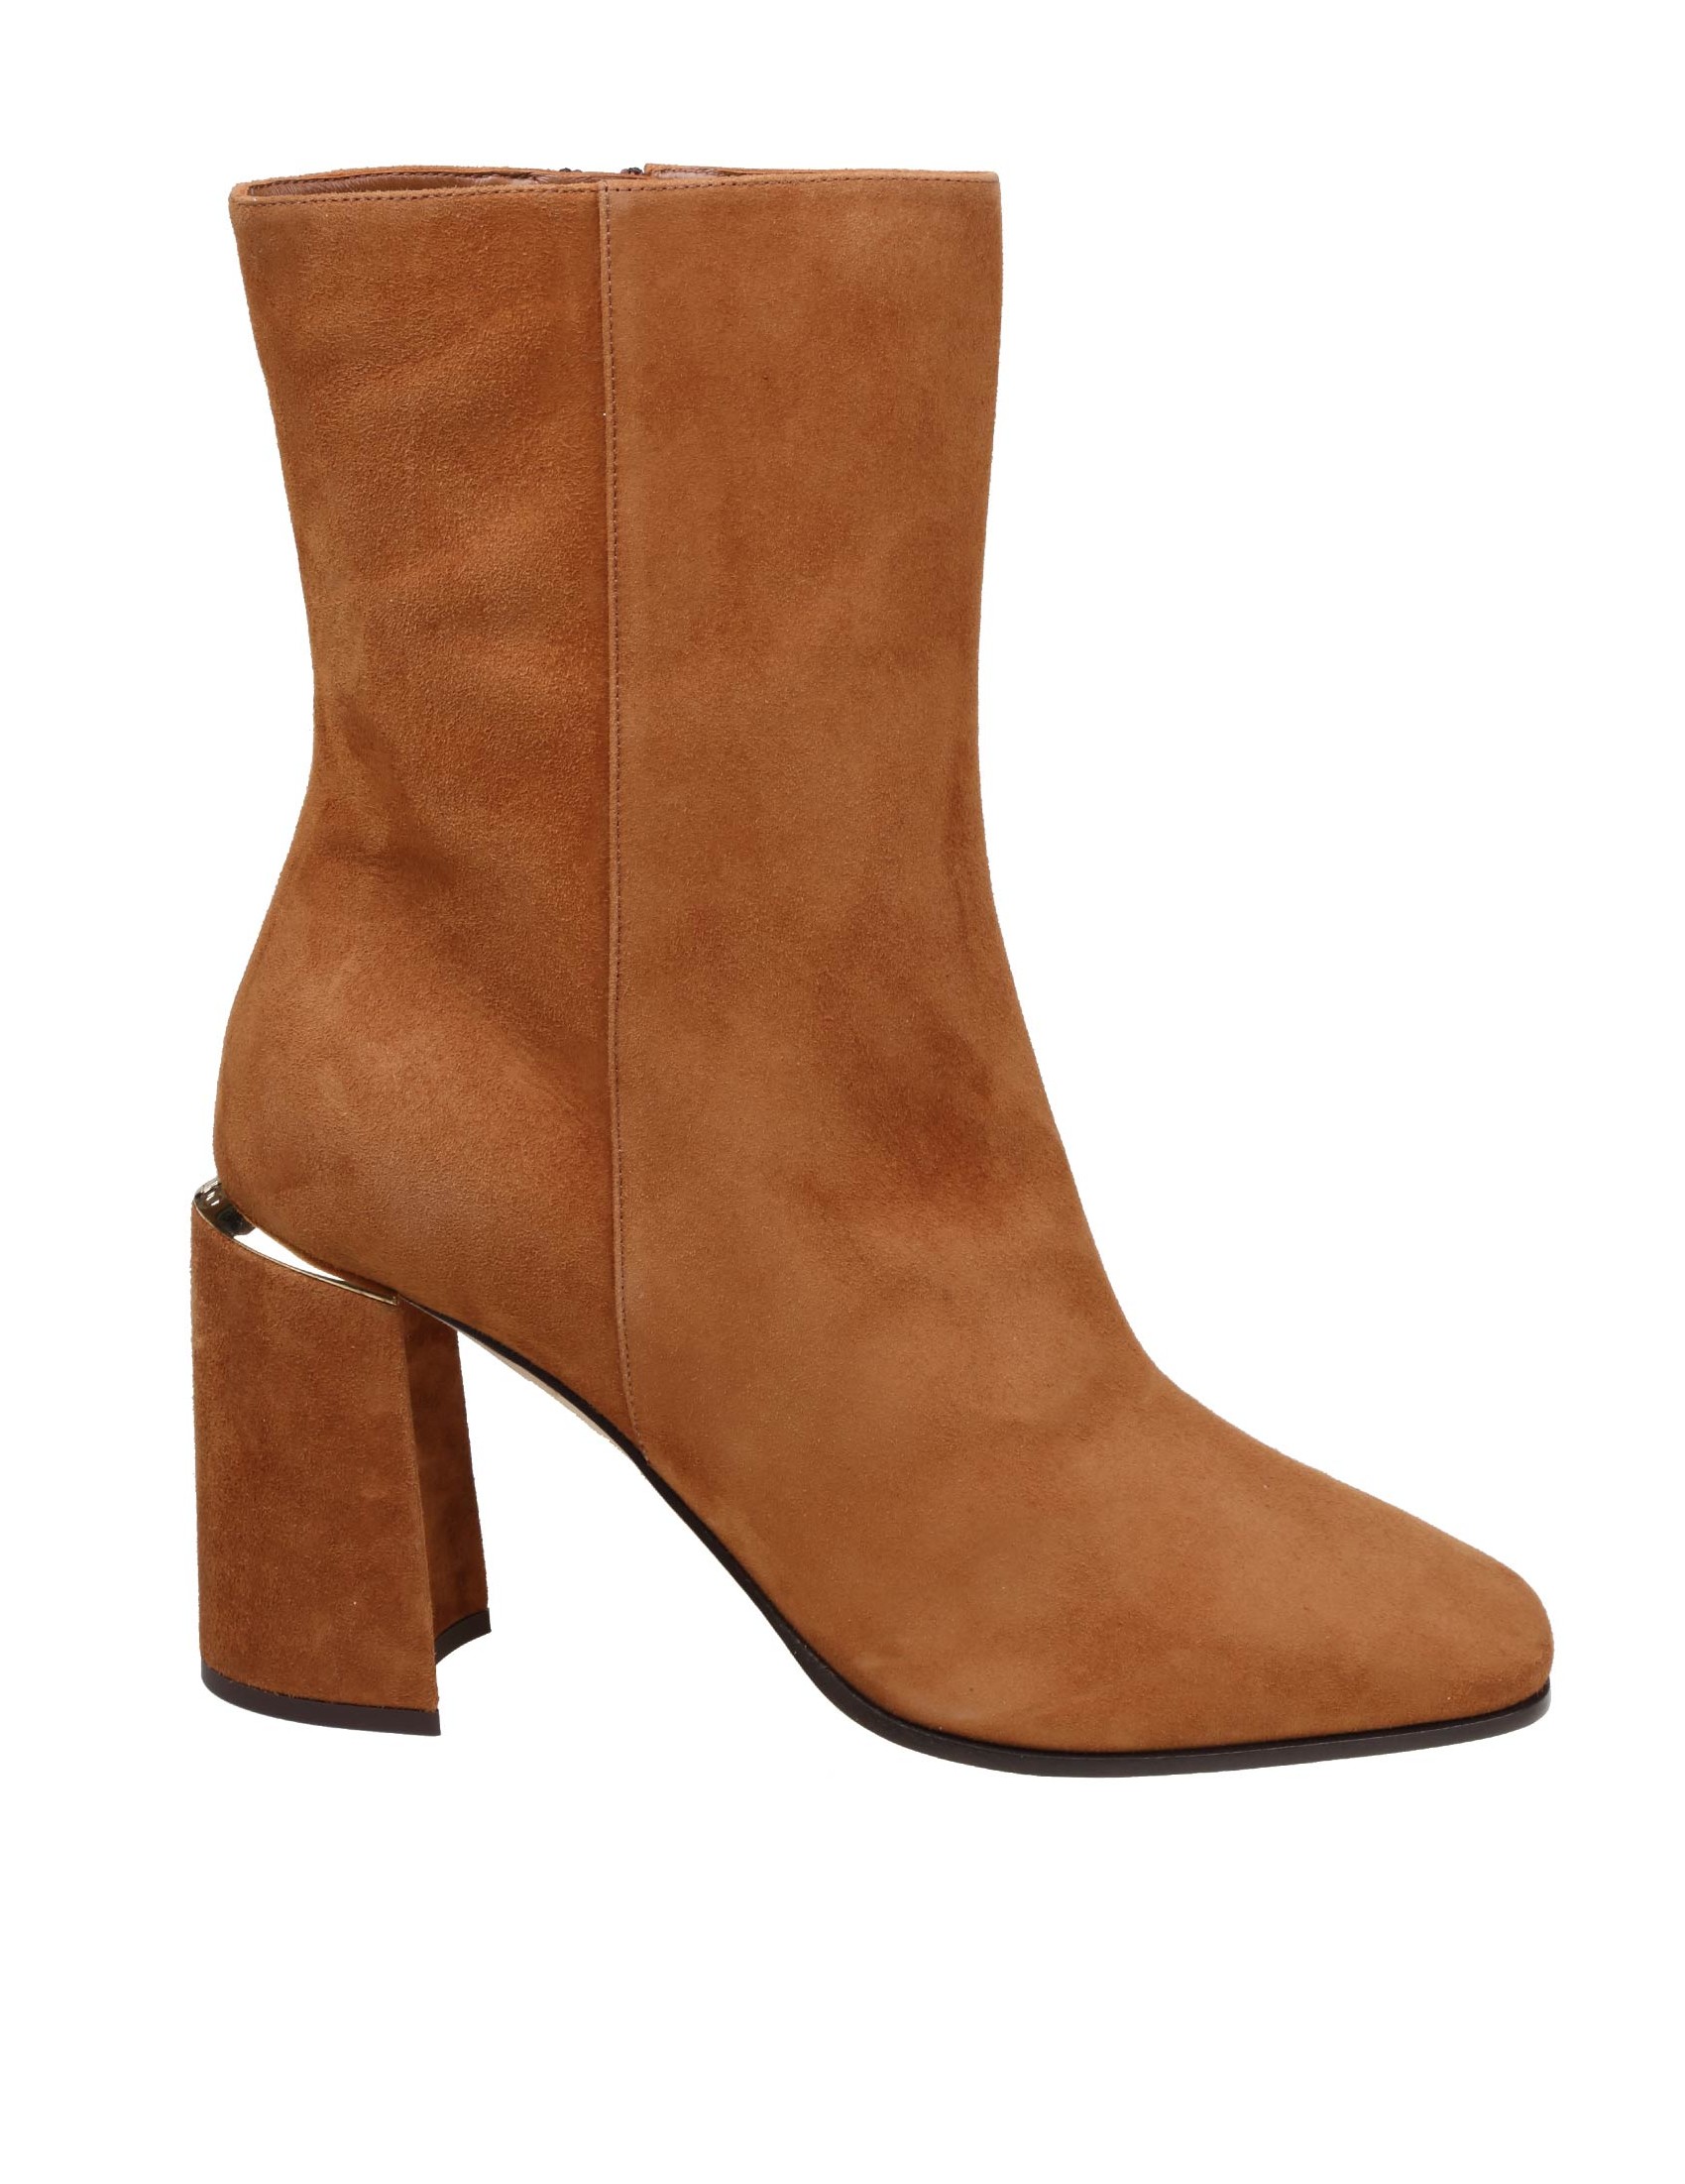 JIMMY CHOO LOREN AB 85 ANKLE BOOTS IN TAN COLOR SUEDE